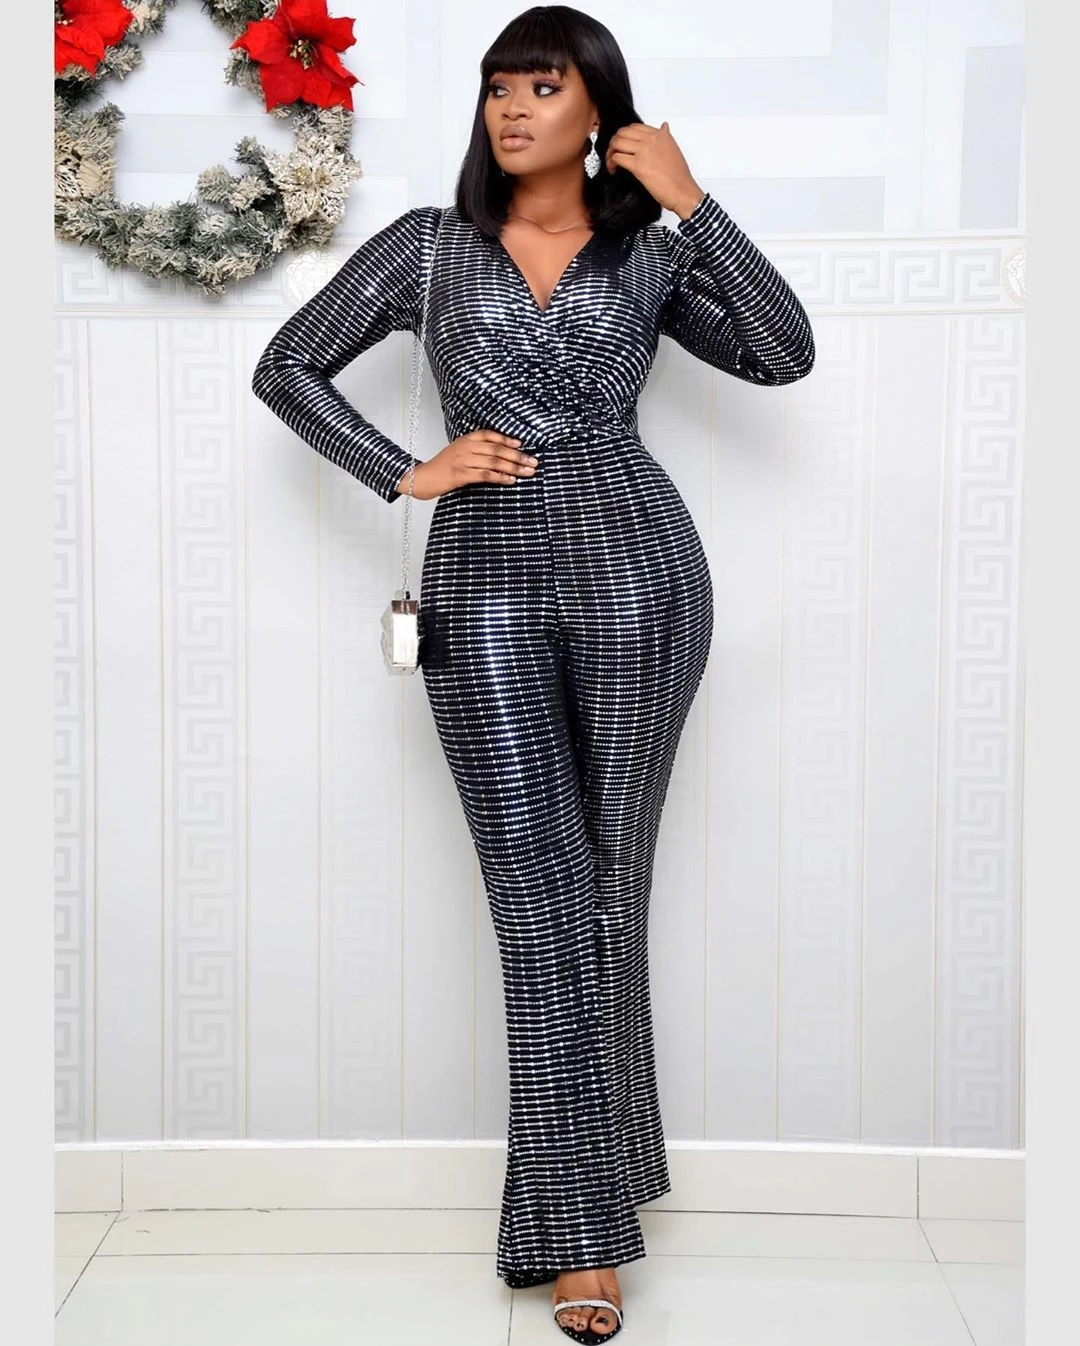 Echoine V-neck Black Sequin Jumpsuit Long Sleeve Sexy Bodycon Stretch Party  Clubwear Outfits Women Rompers Playsuit Clothing - Jumpsuits - AliExpress